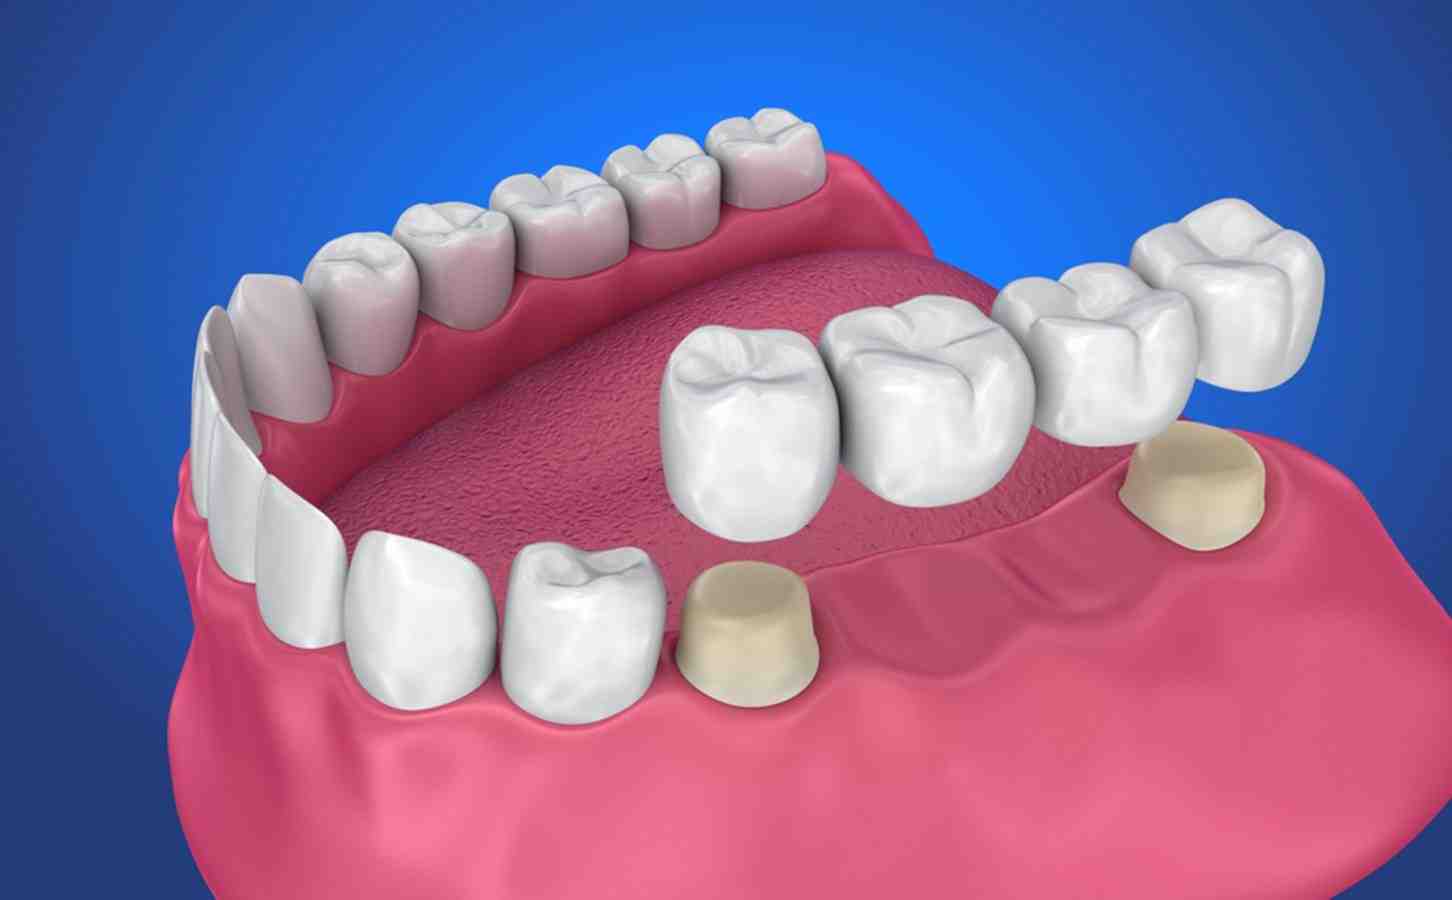 What are the disadvantages of dental crowns?